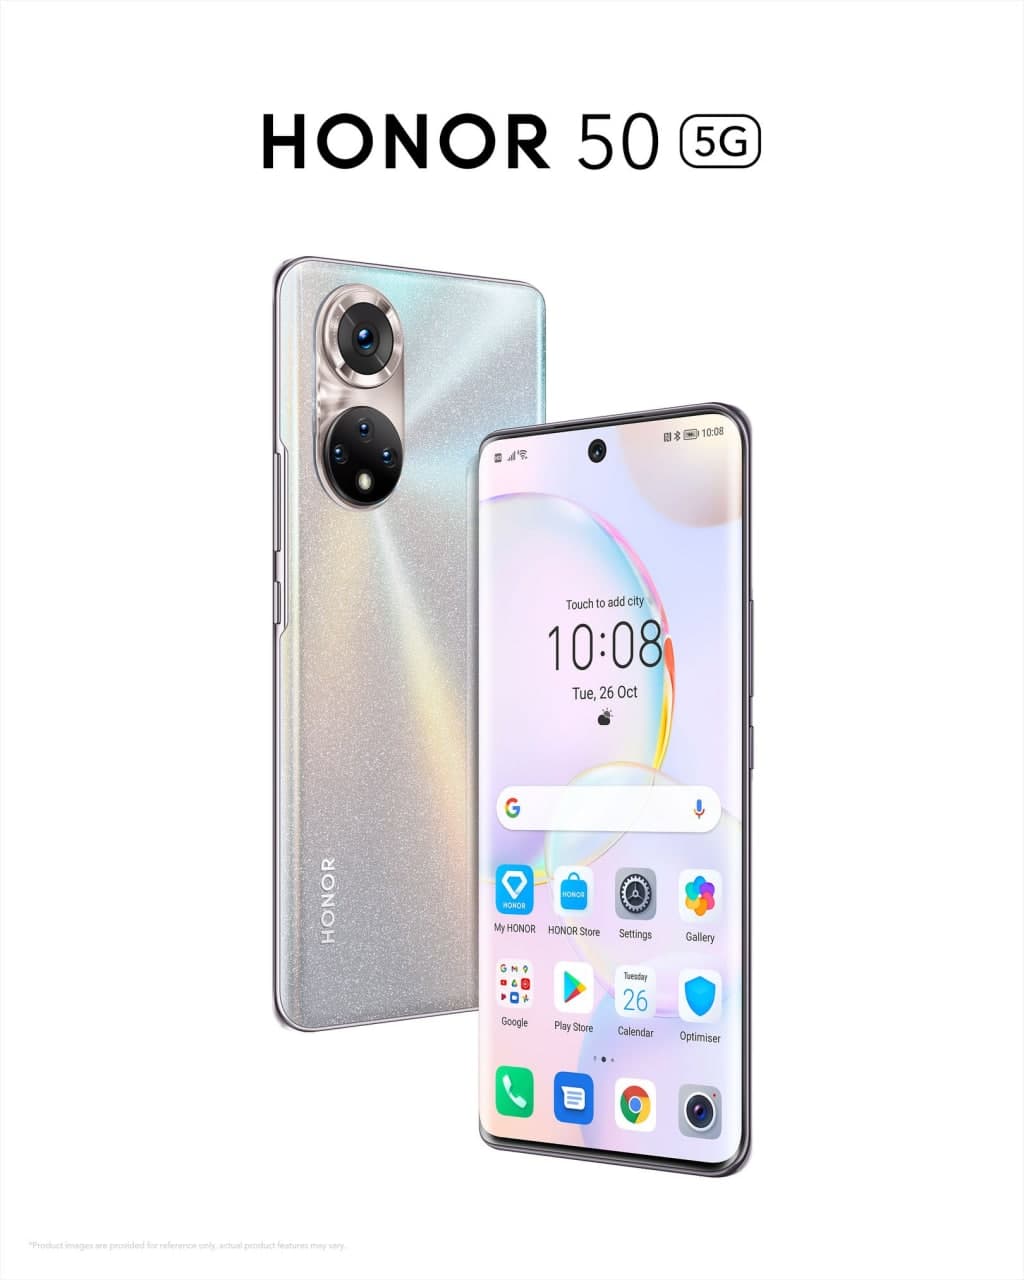 Honor 50 Google Mobile Services